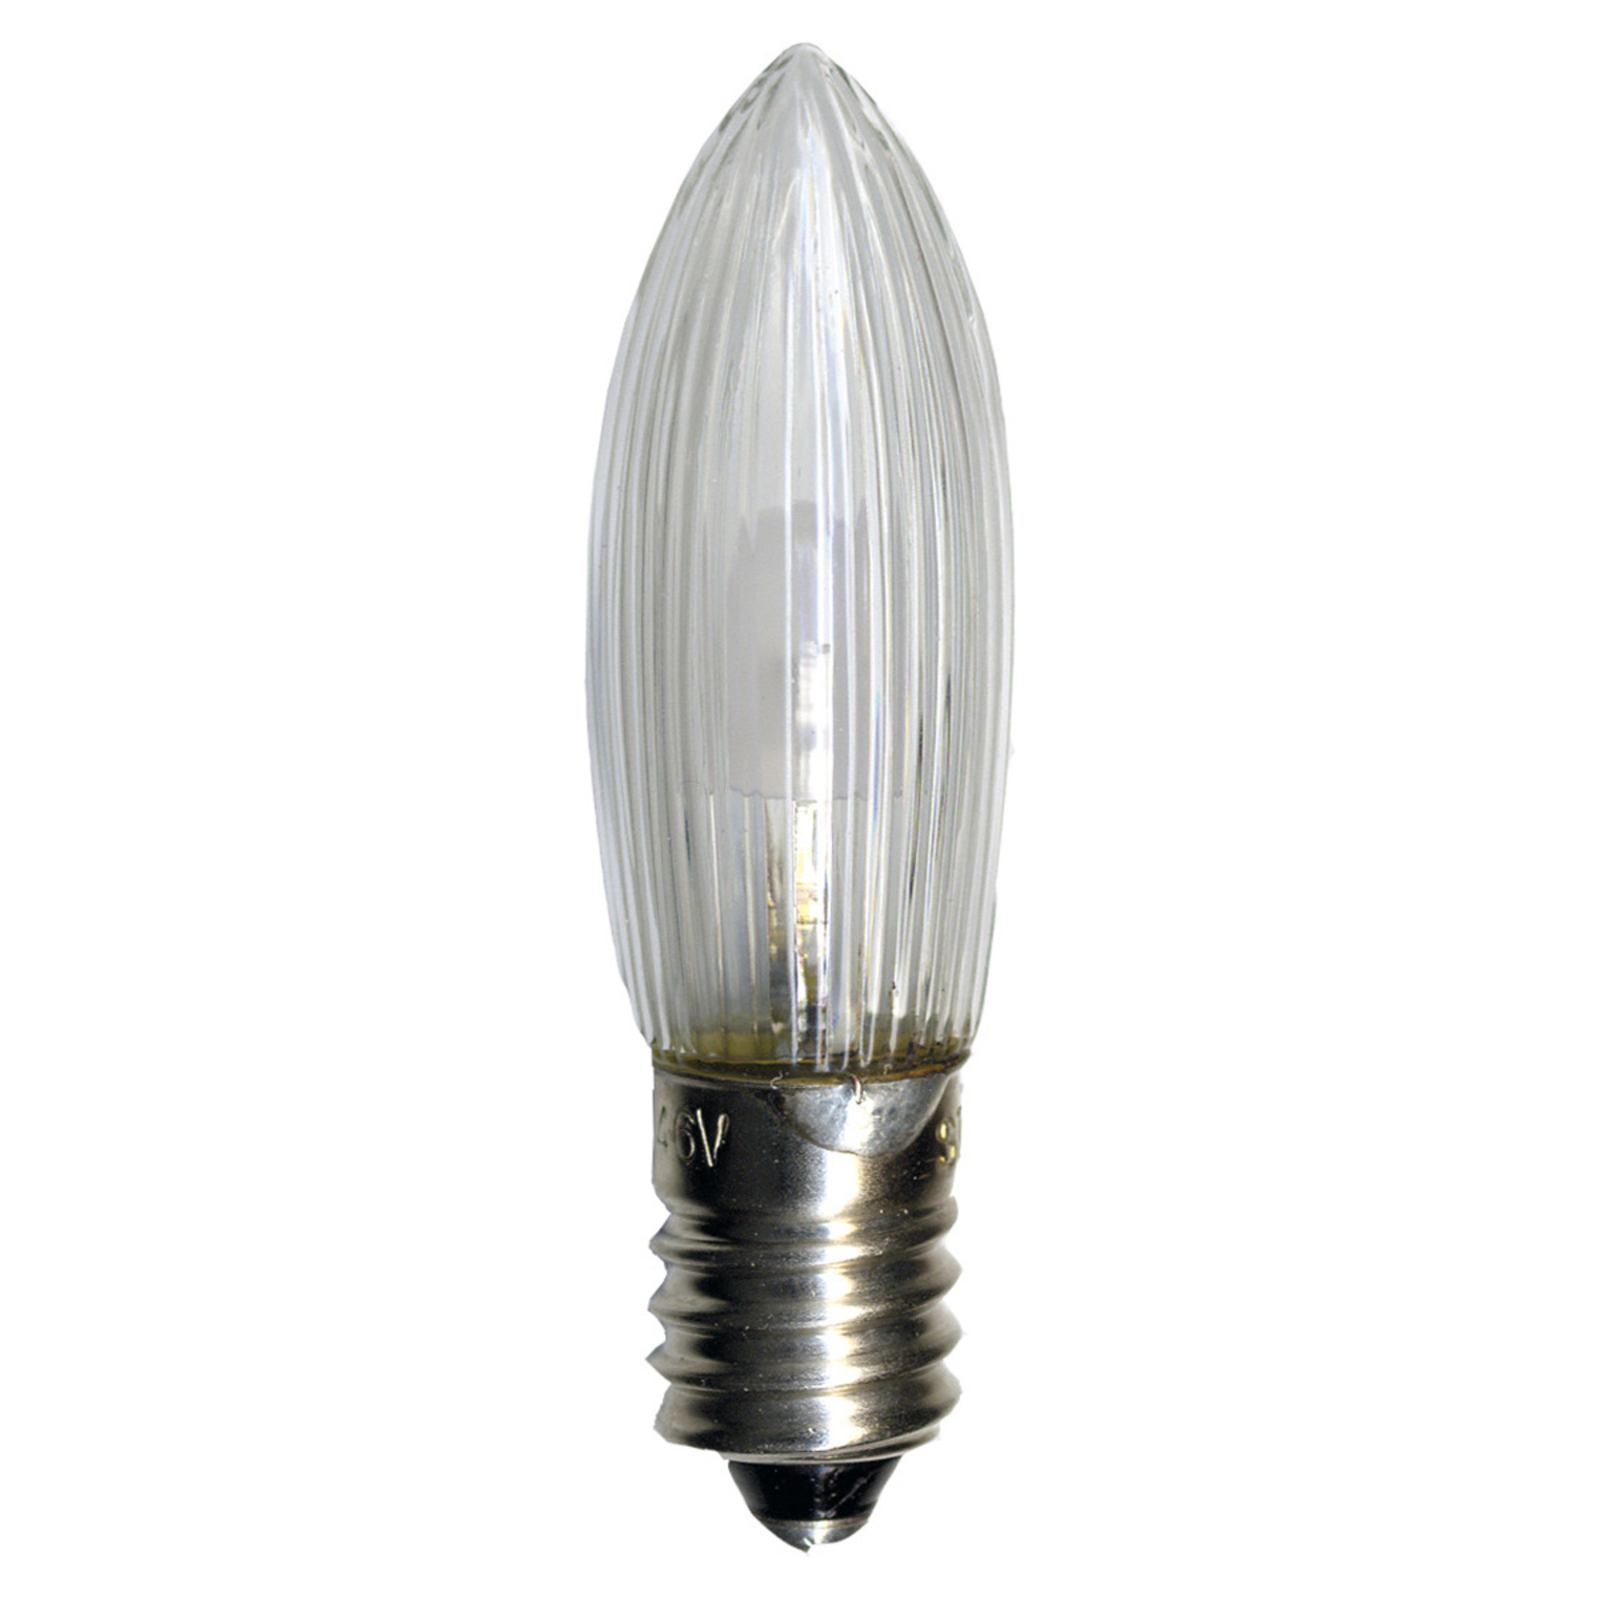 LED replacement bulb E10 0.2W 2,100K 7-pack